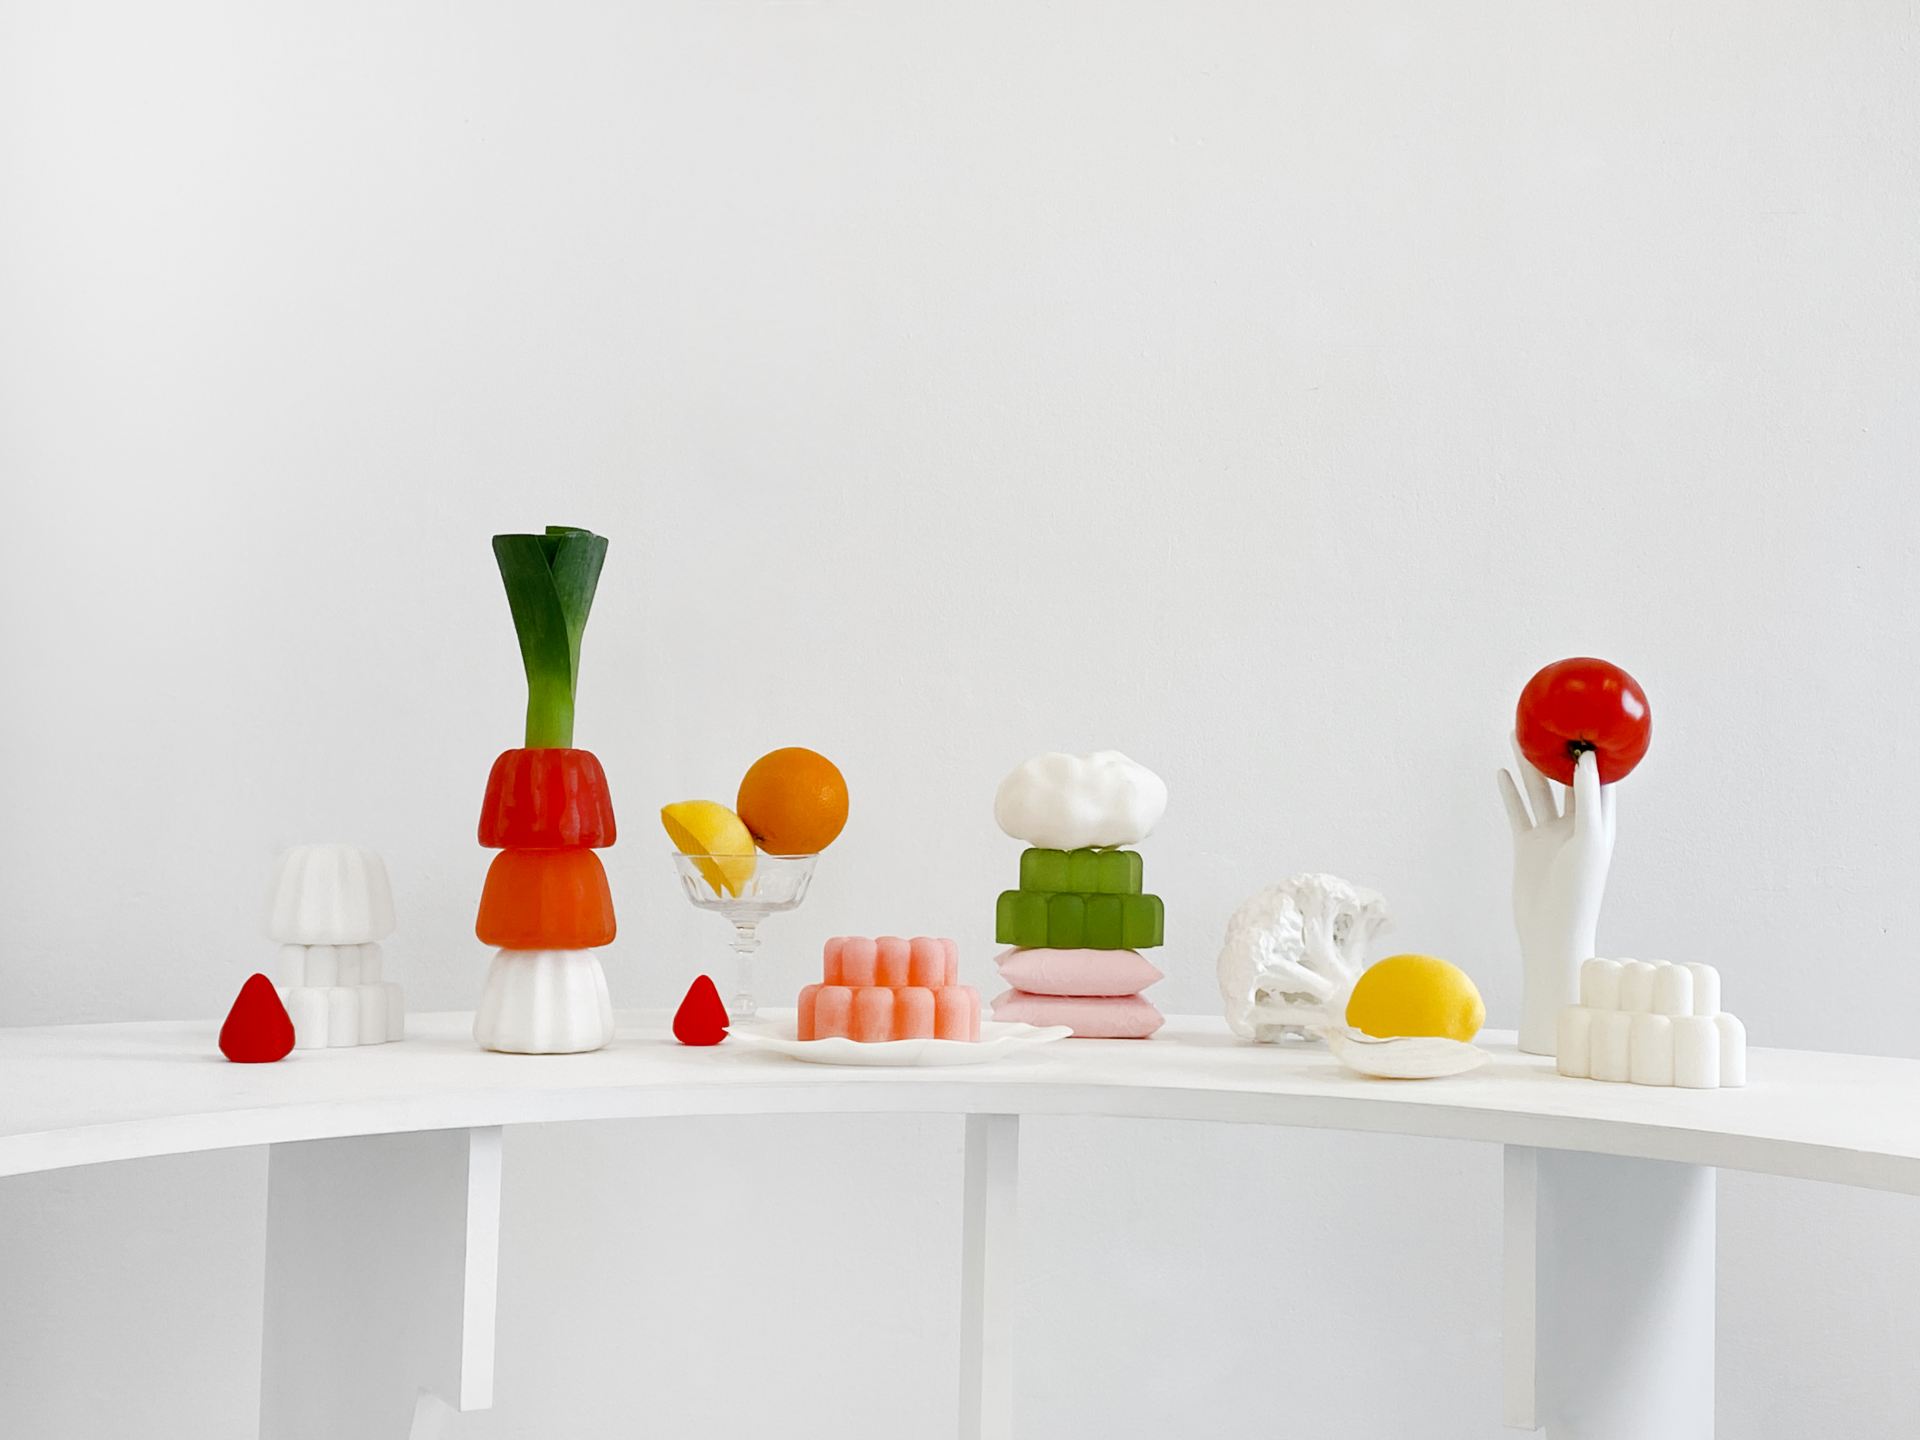 An image of several jelly-like resin objects in a scene with 3D Printed objects such as hands, other jellies and vegetables.